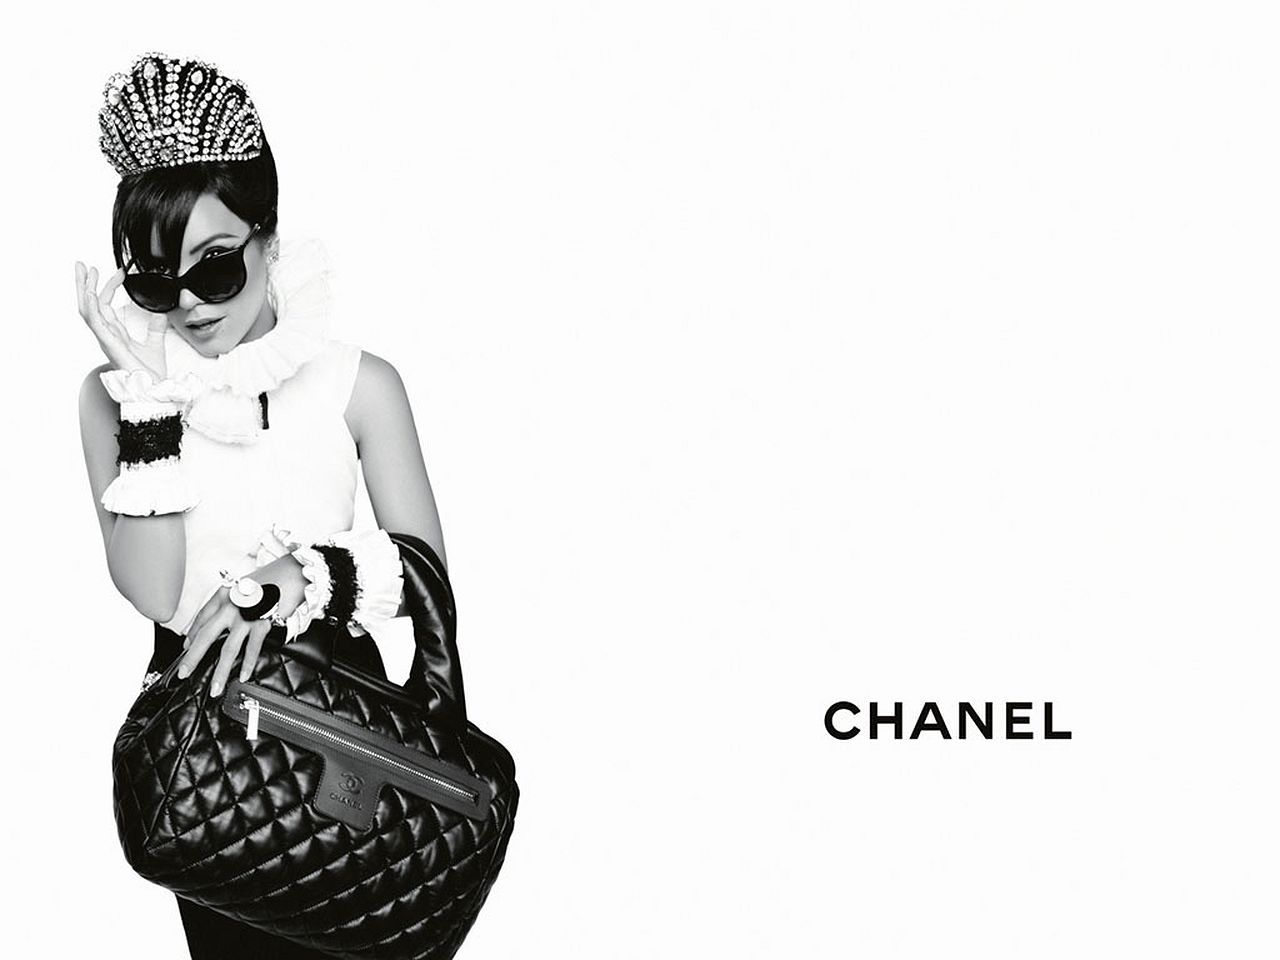 Wallpapers Brands Chanel CHANEL Image Download